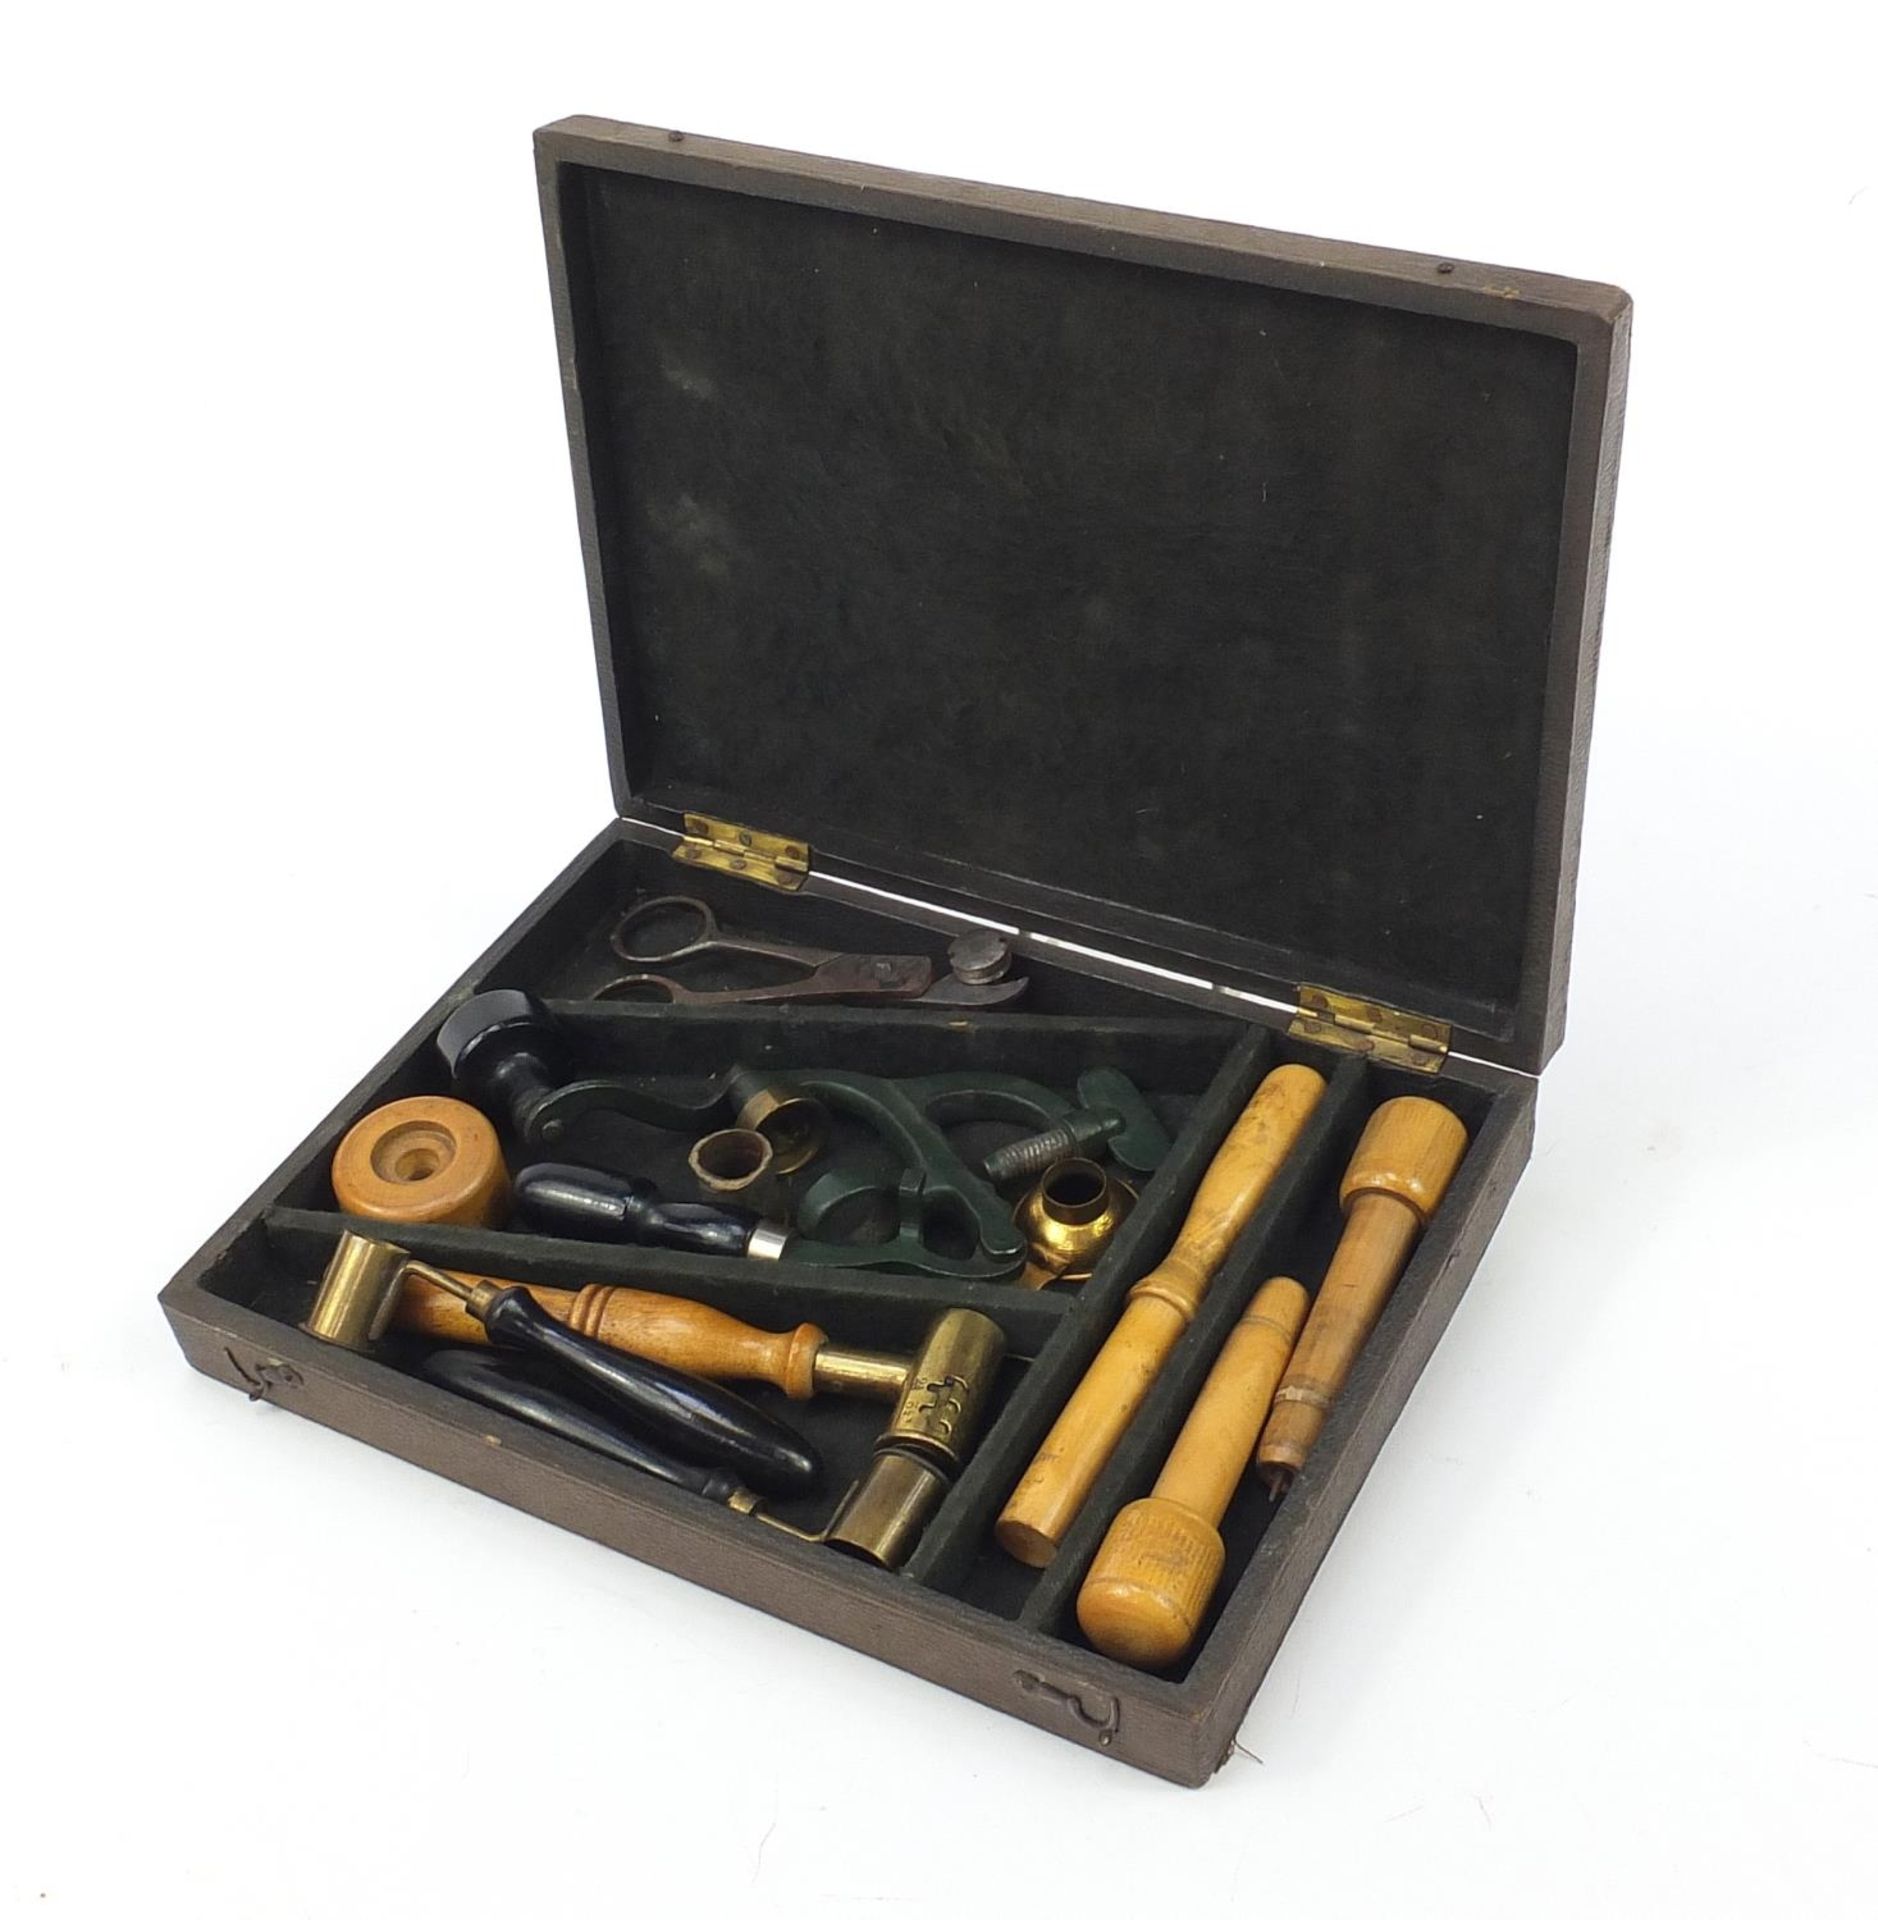 Antique gun ammunition making equipment including a cartridge maker, clamps and scissors housed in a - Bild 4 aus 5